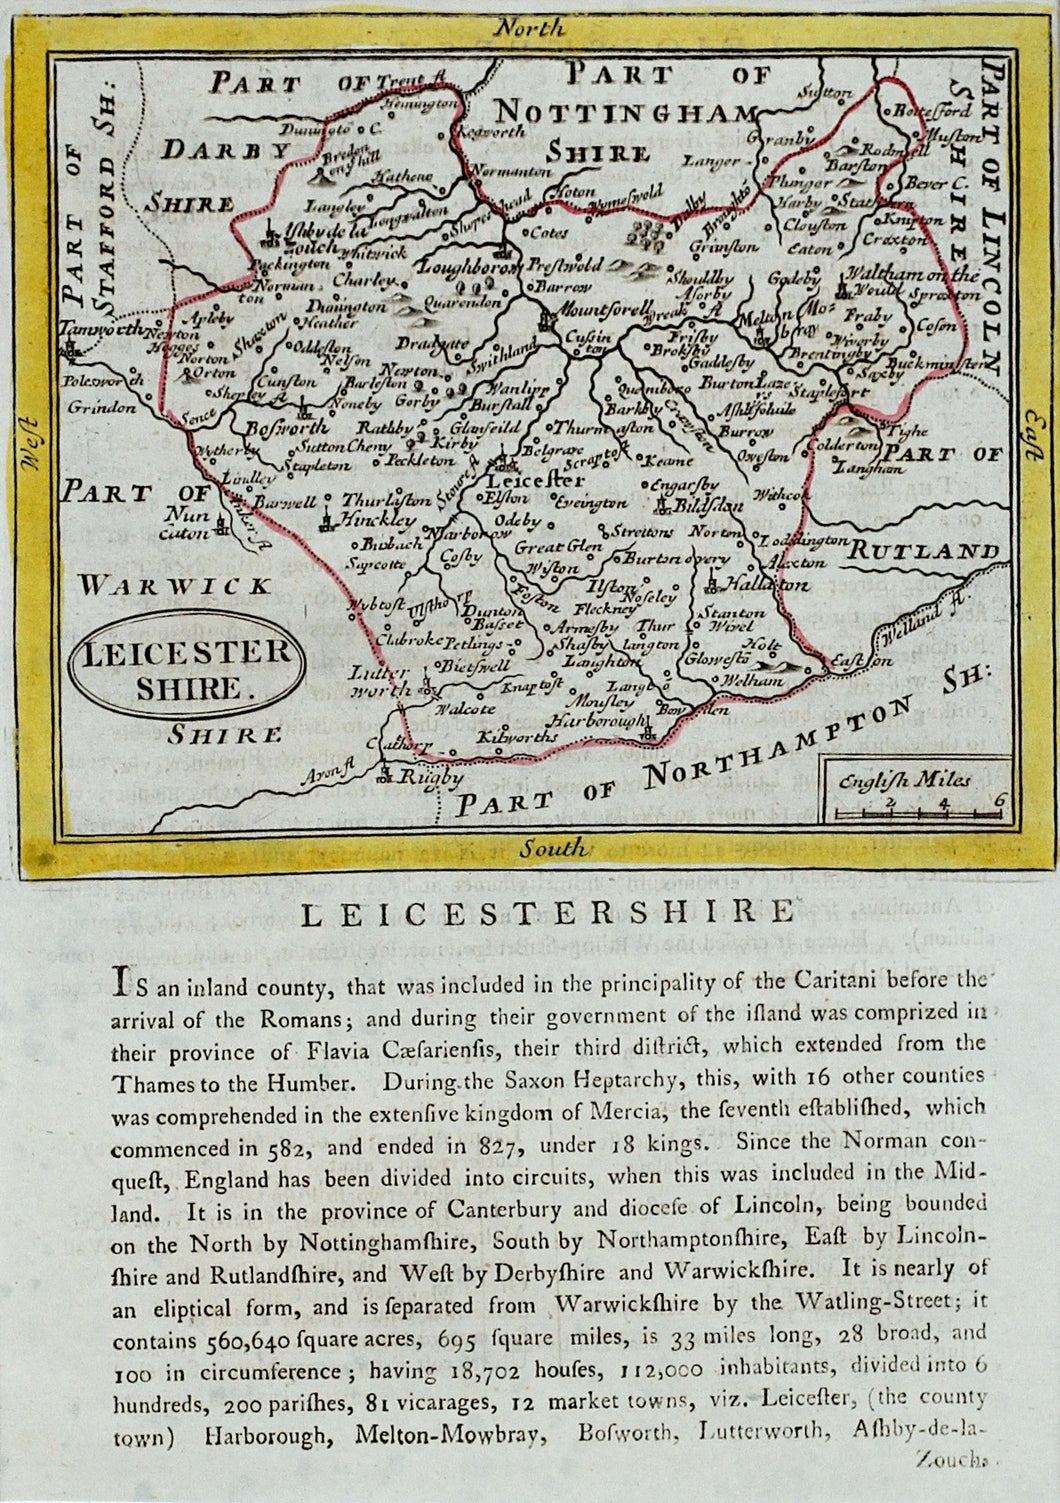 Leicestershire - Antique Map by Seller/Grose 1694 - 1787